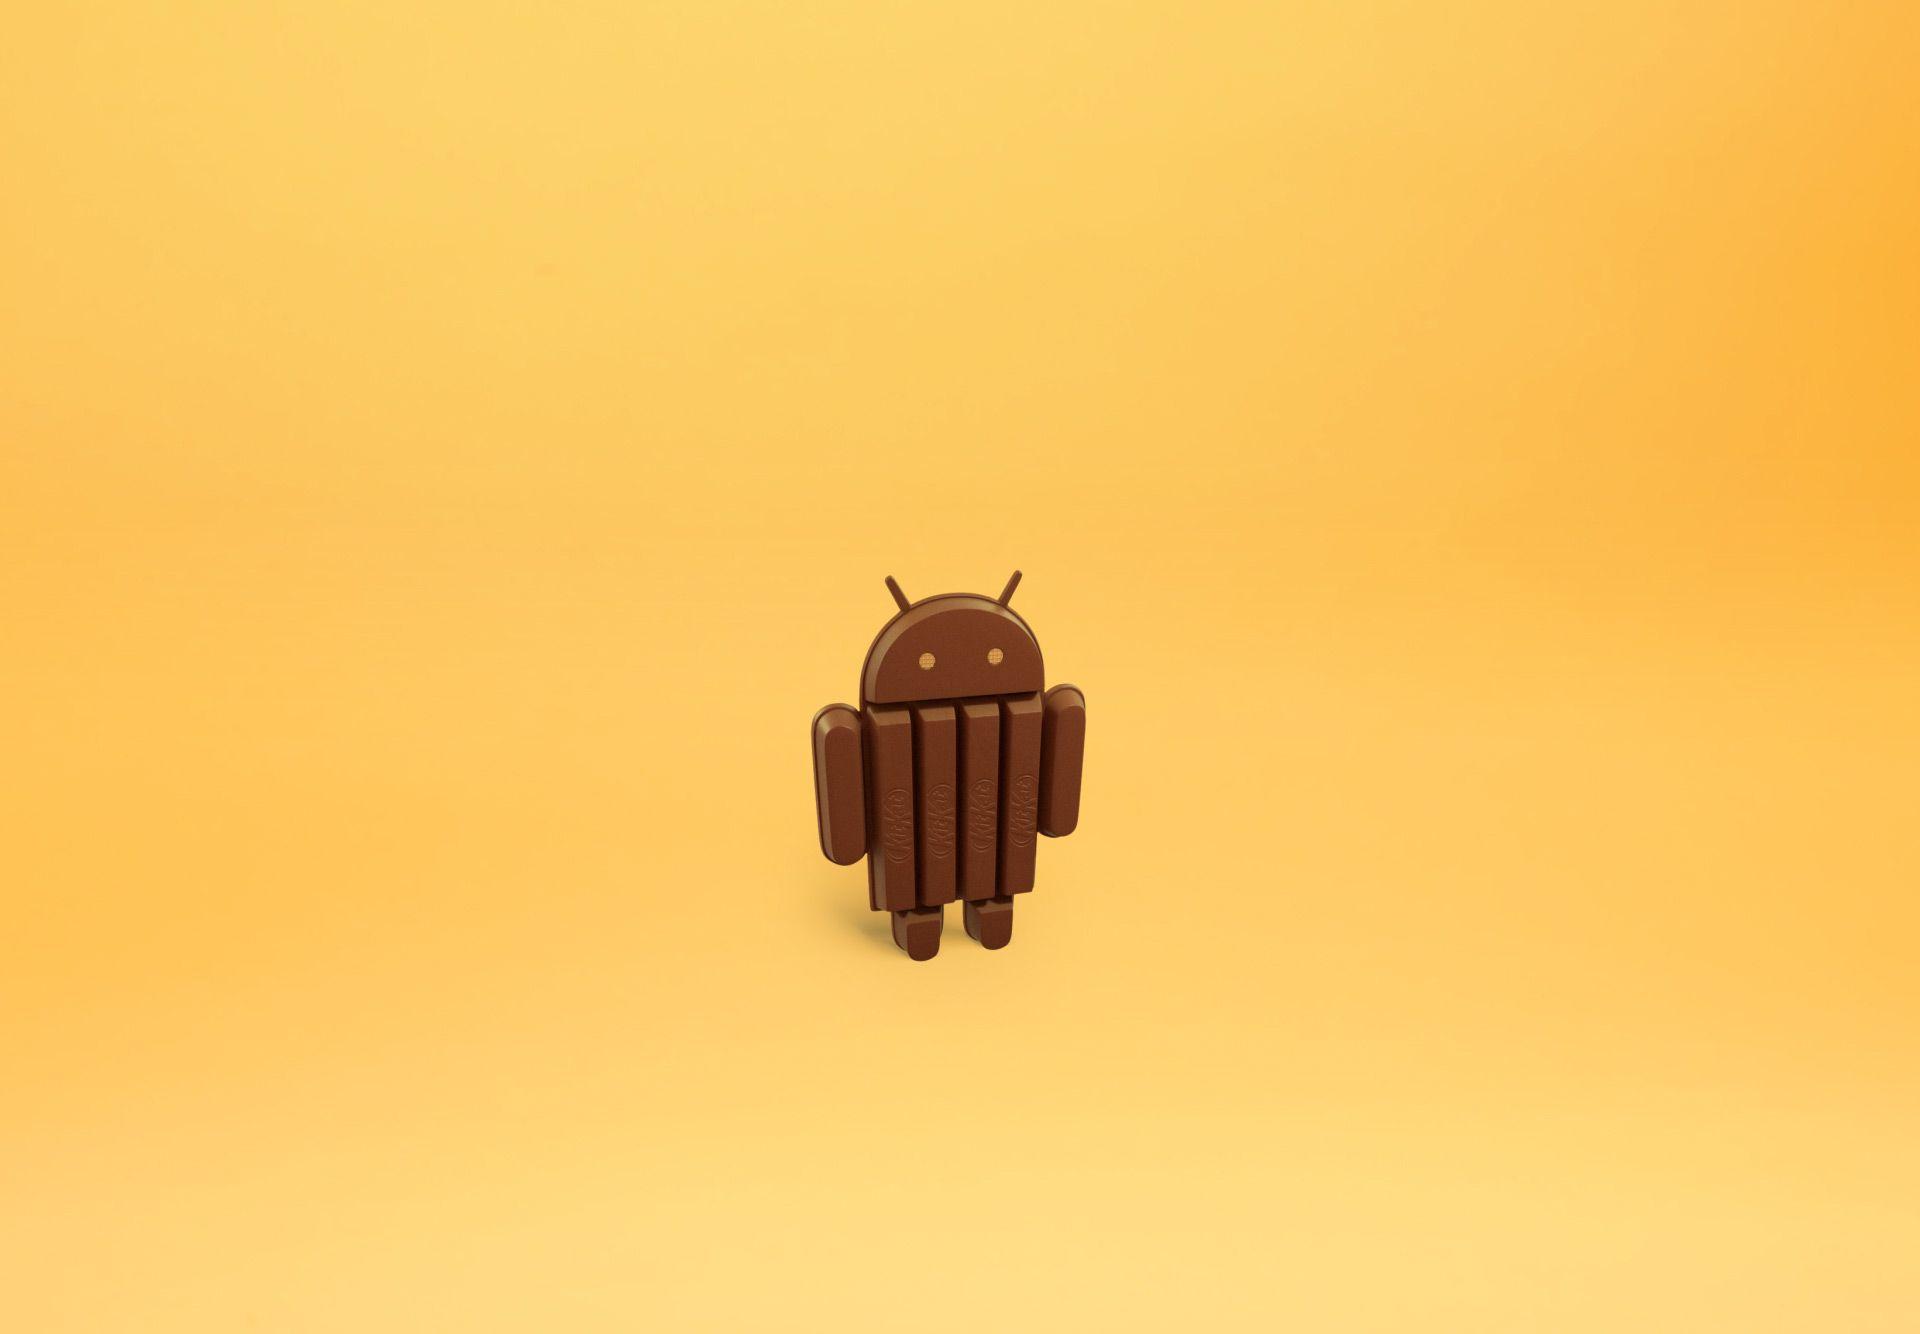 How to install Android 4.4 KITKAT on the 2013 Nexus 7 WiFi